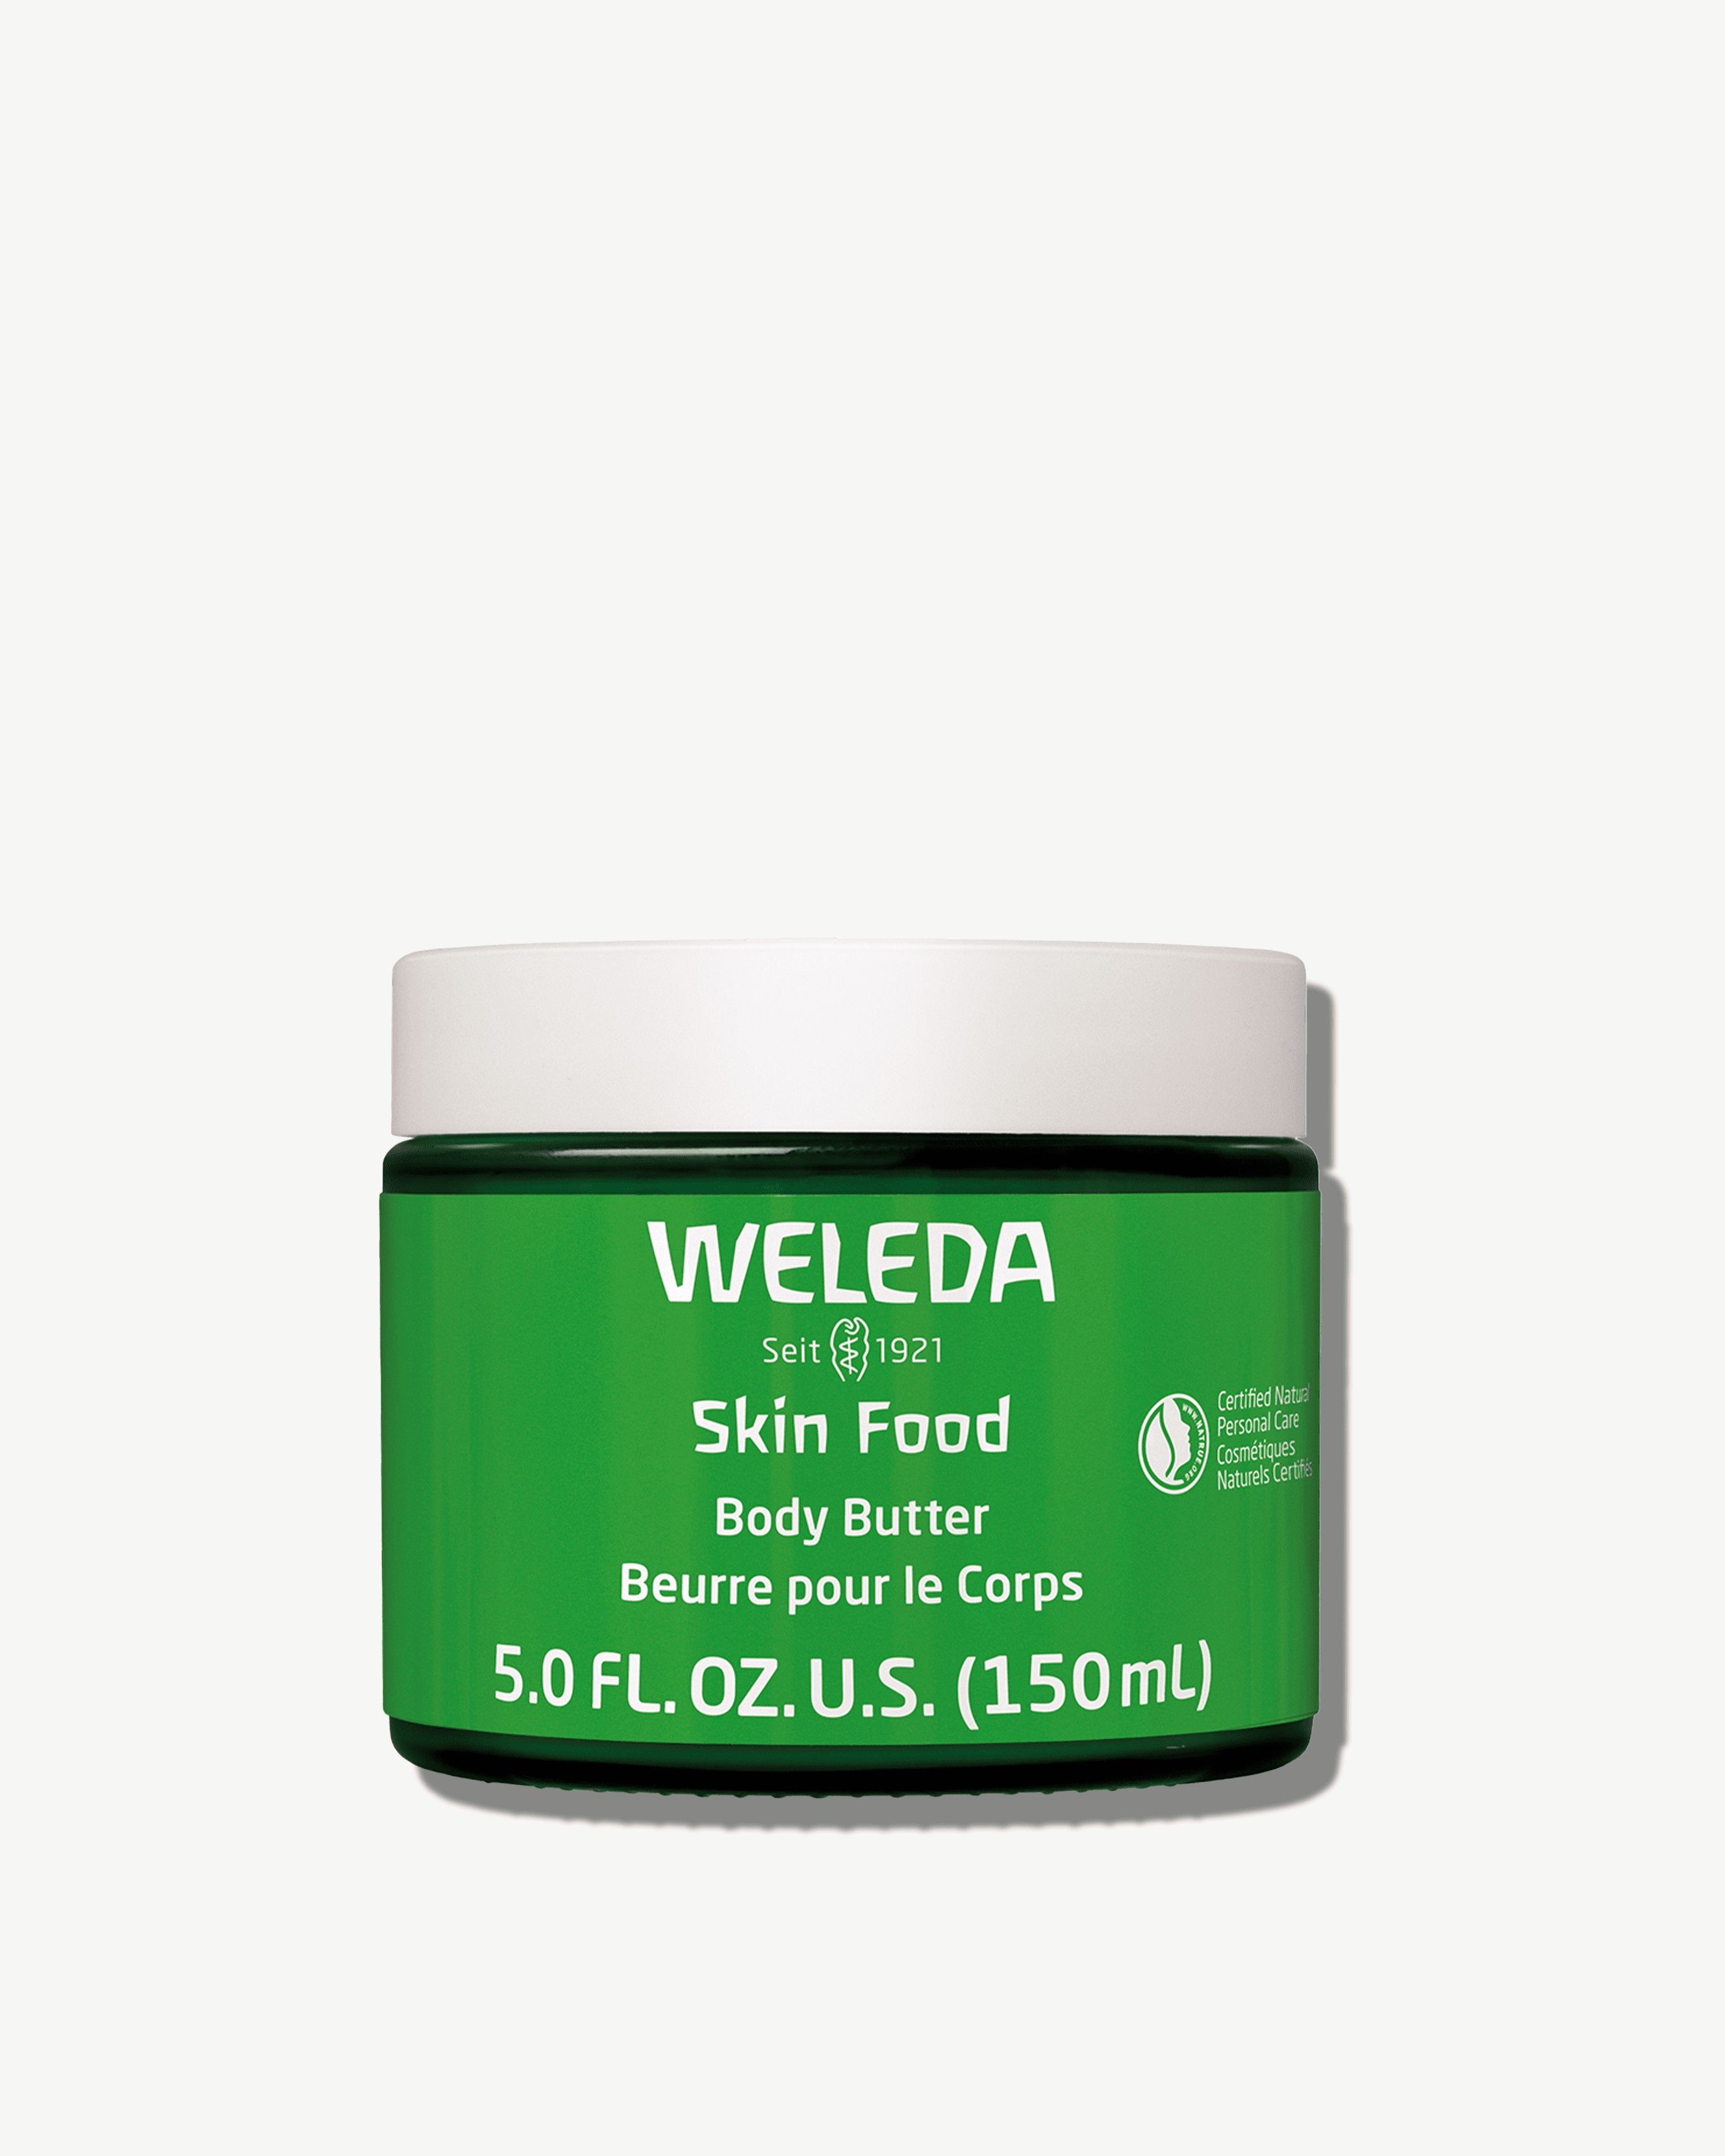 Weleda Skin Food Review  Middle Age Beauty Skincare